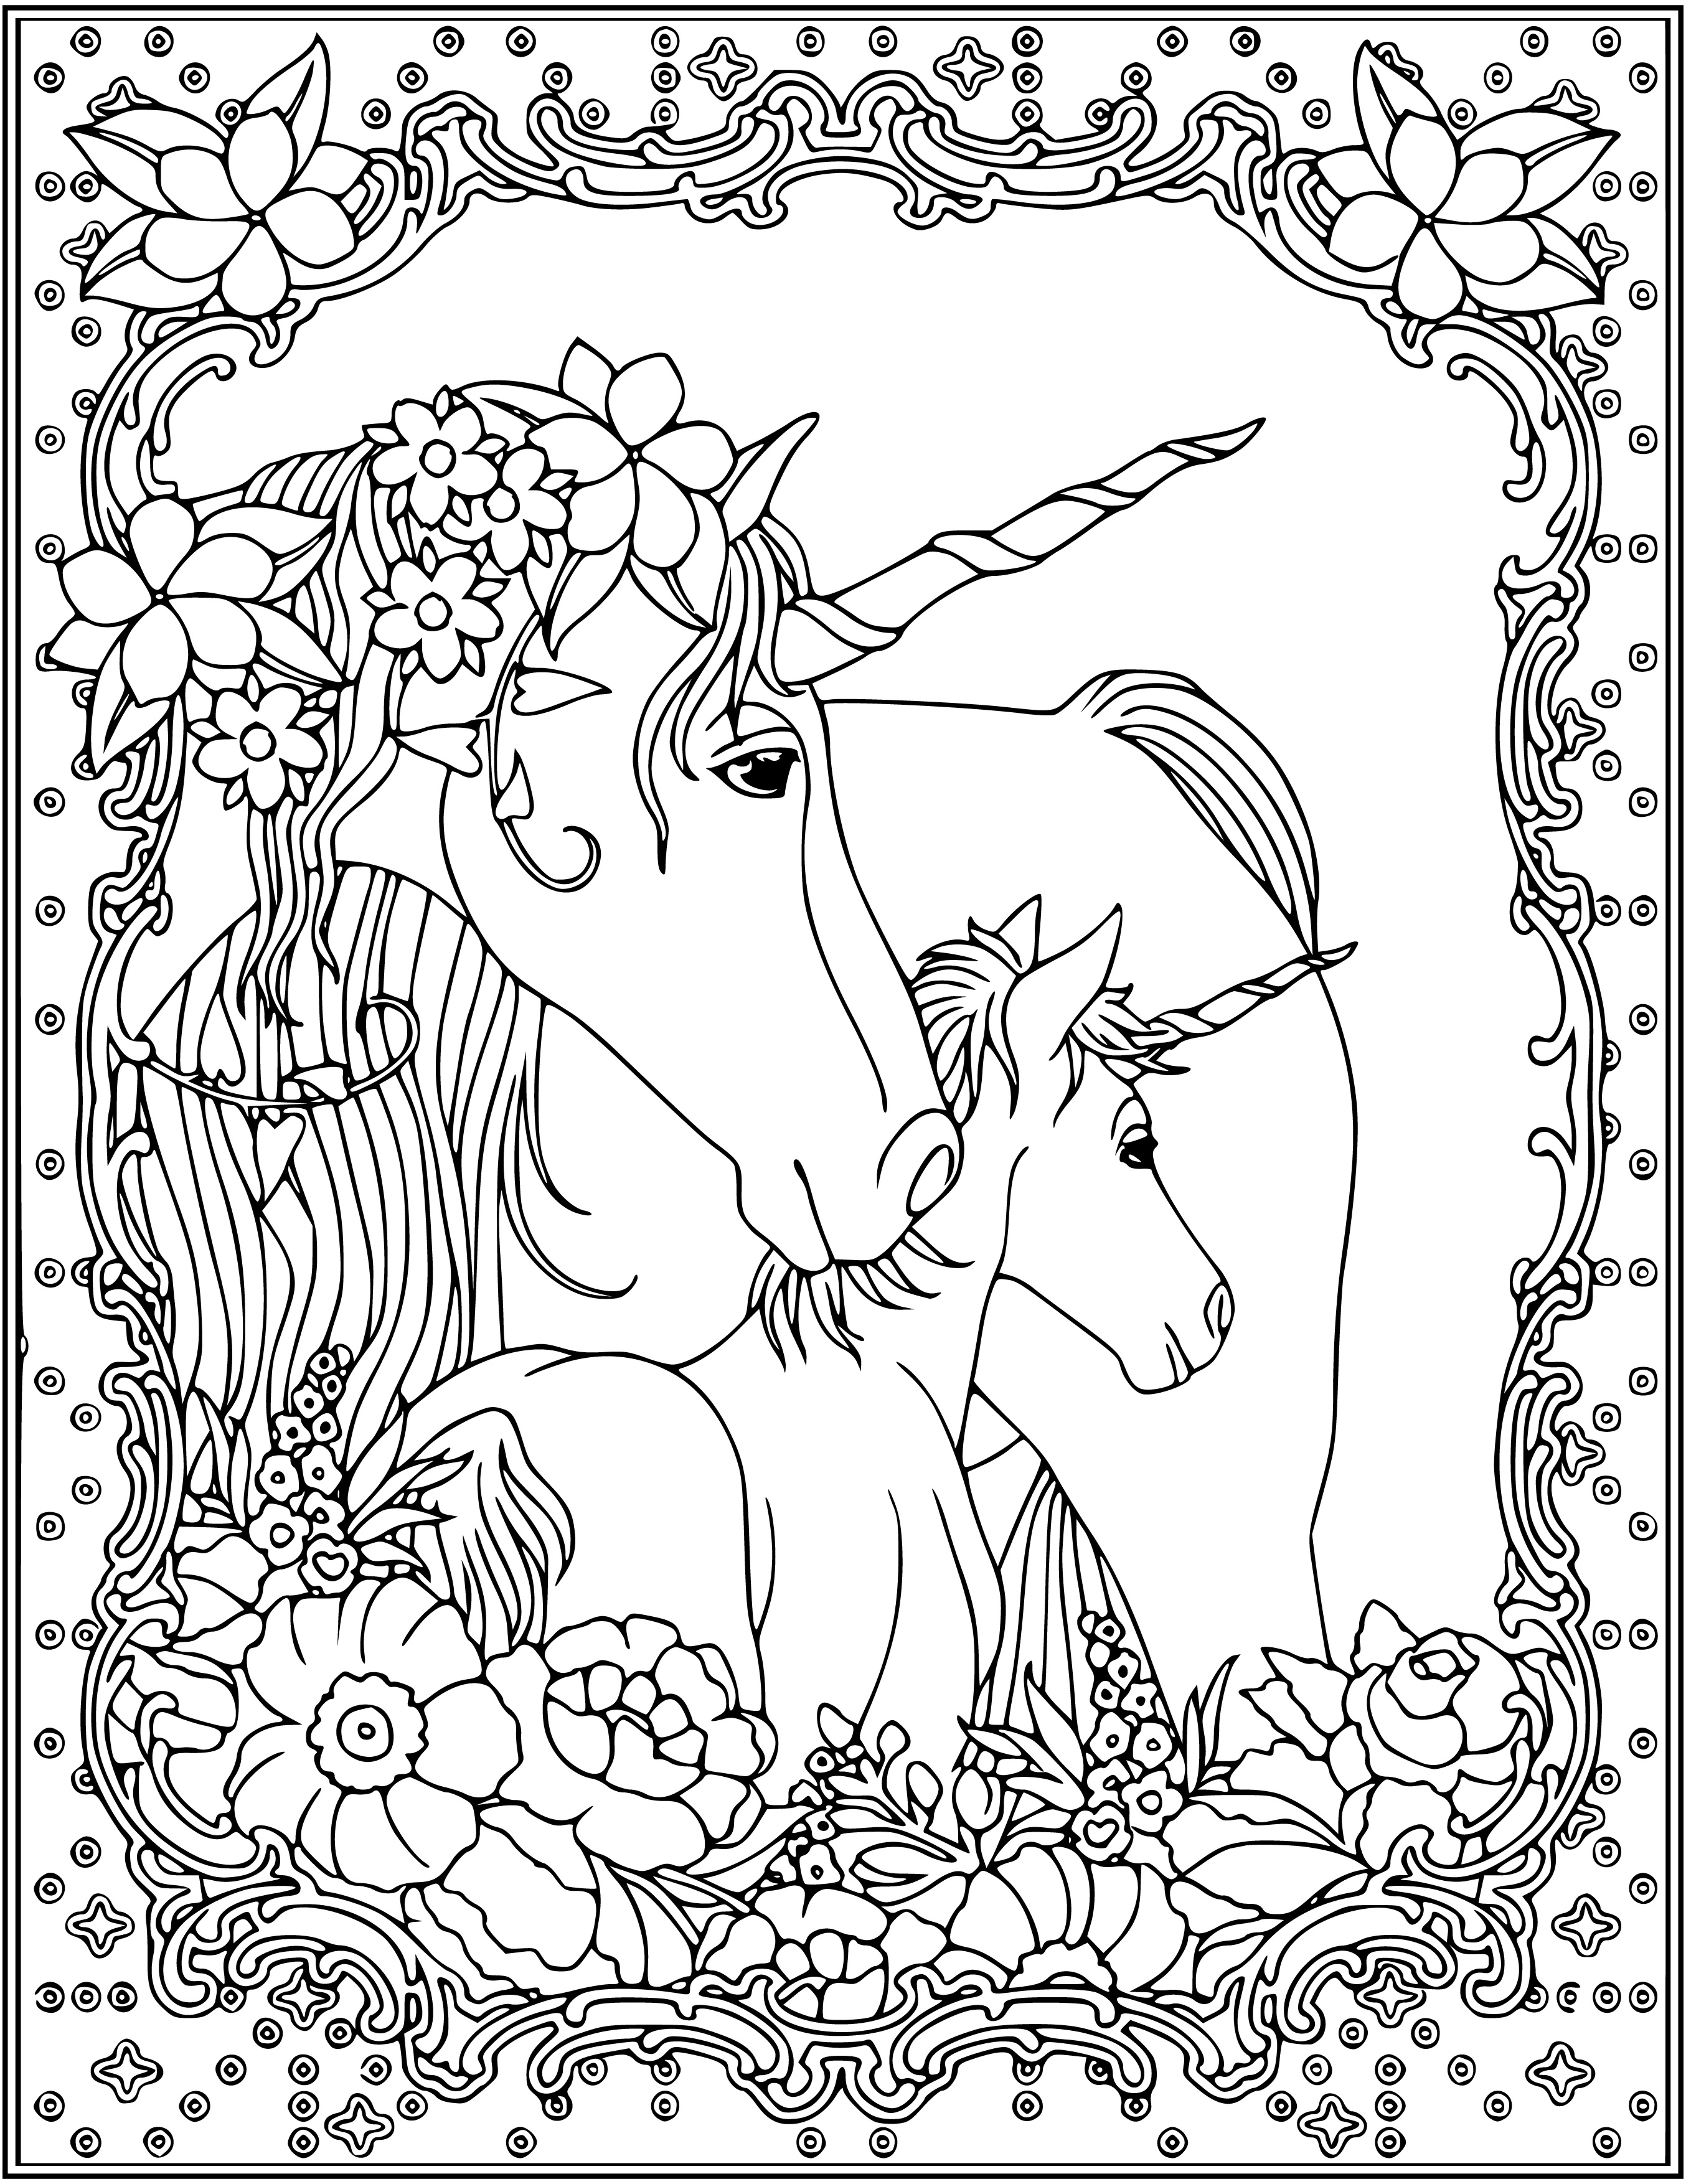 Unicorn Head Adult Coloring Page